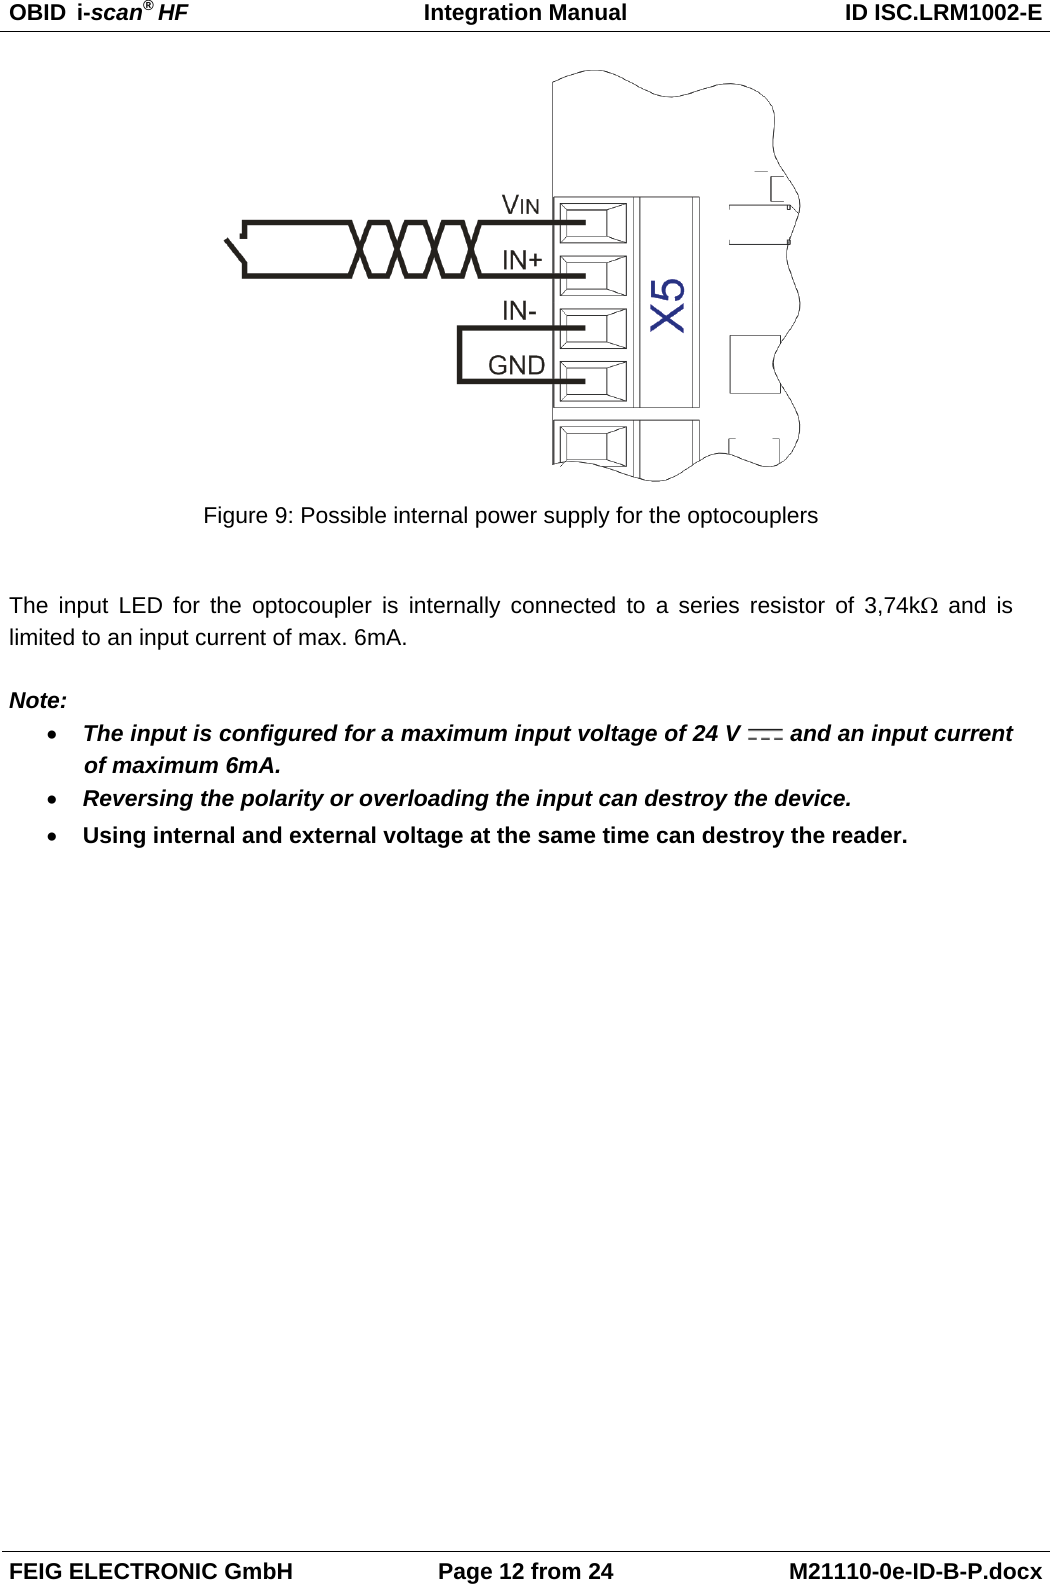 OBID  i-scan® HF Integration Manual ID ISC.LRM1002-E  FEIG ELECTRONIC GmbH Page 12 from 24 M21110-0e-ID-B-P.docx   Figure 9: Possible internal power supply for the optocouplers  The input LED for the optocoupler is internally connected to a series resistor of 3,74kΩ and is limited to an input current of max. 6mA.   Note: • The input is configured for a maximum input voltage of 24 V   and an input current of maximum 6mA. • Reversing the polarity or overloading the input can destroy the device.  • Using internal and external voltage at the same time can destroy the reader.      